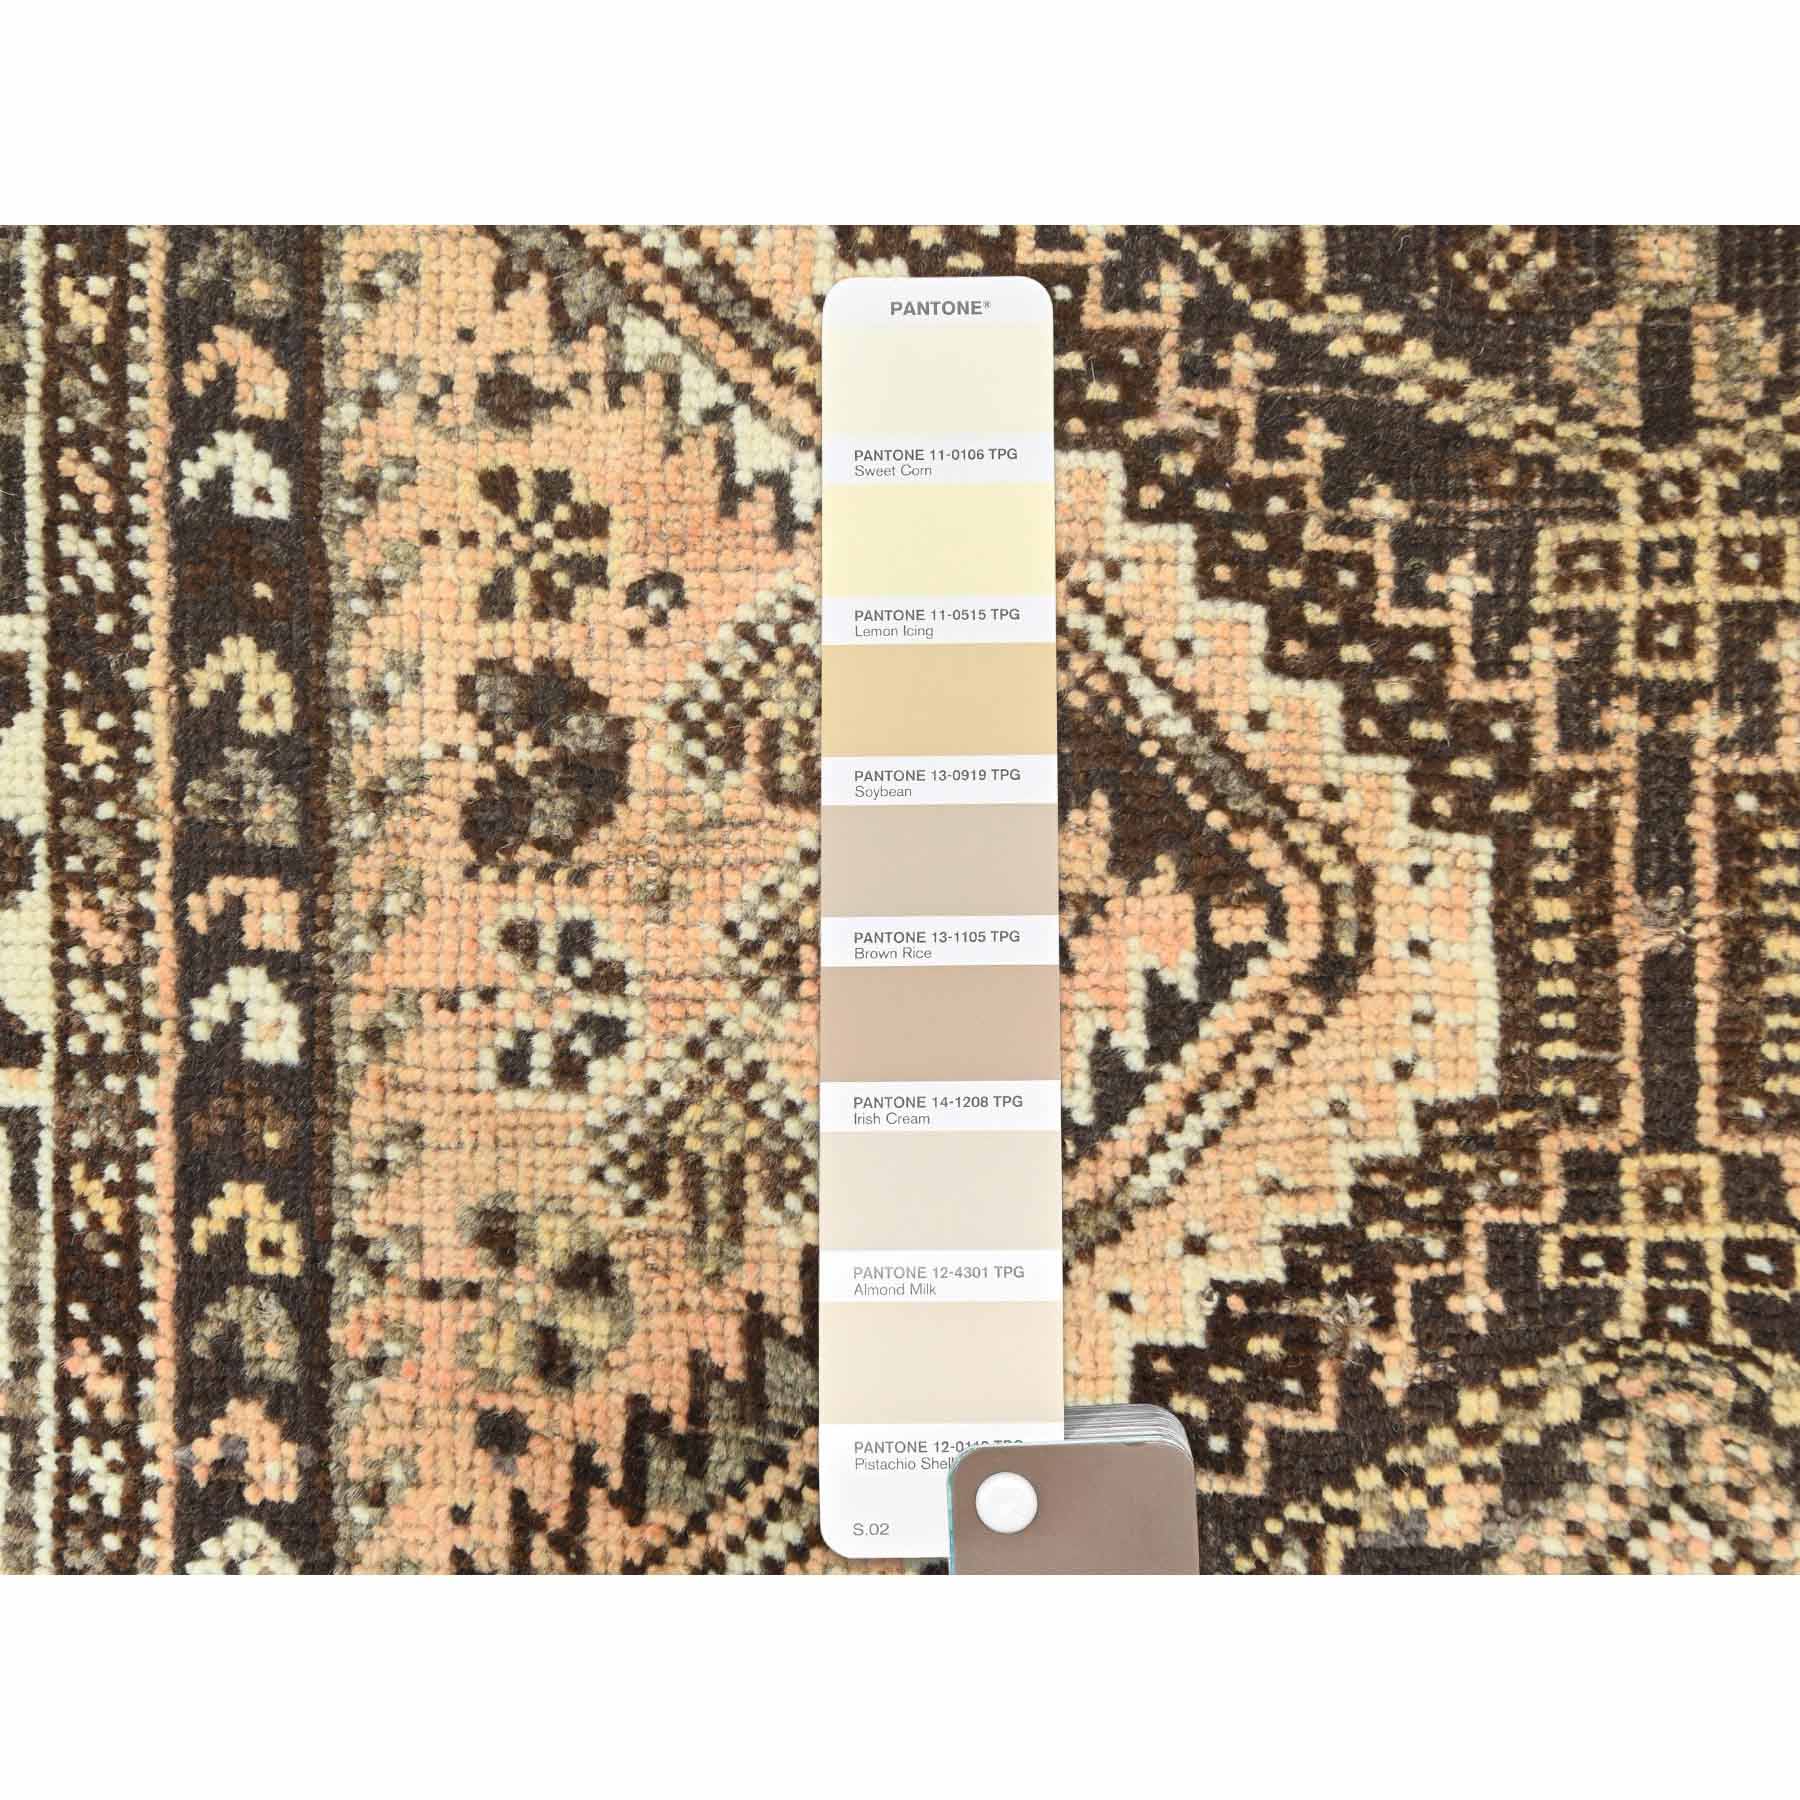 Overdyed-Vintage-Hand-Knotted-Rug-413985